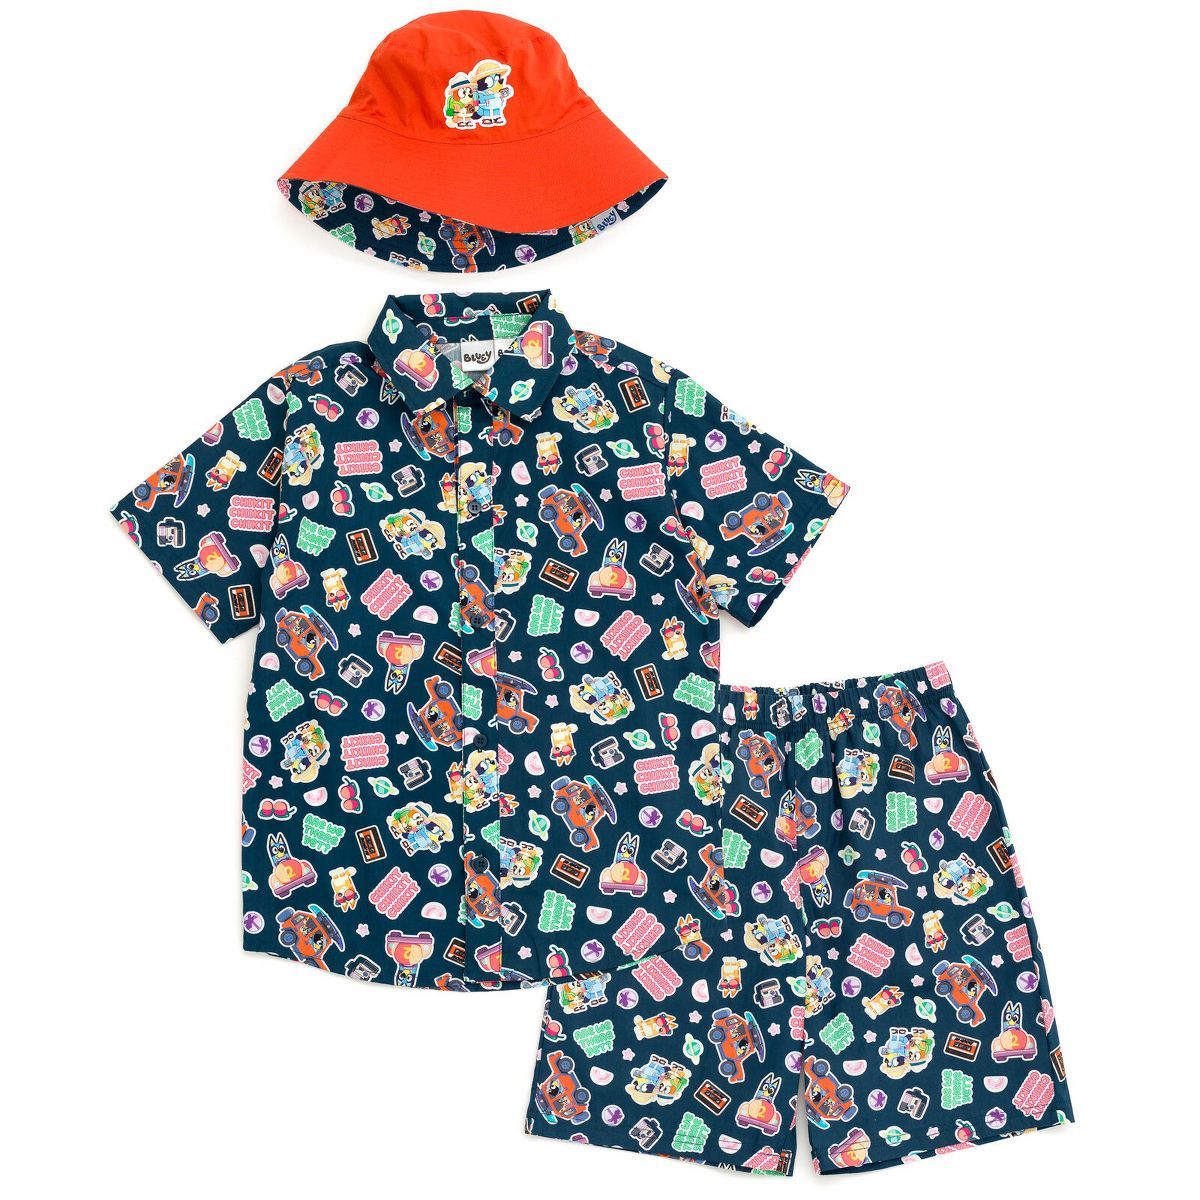 Bluey Button Down Shirt Shorts and Bucket Sun Hat 3 Piece Outfit Set Little Kid to Big Kid | Target